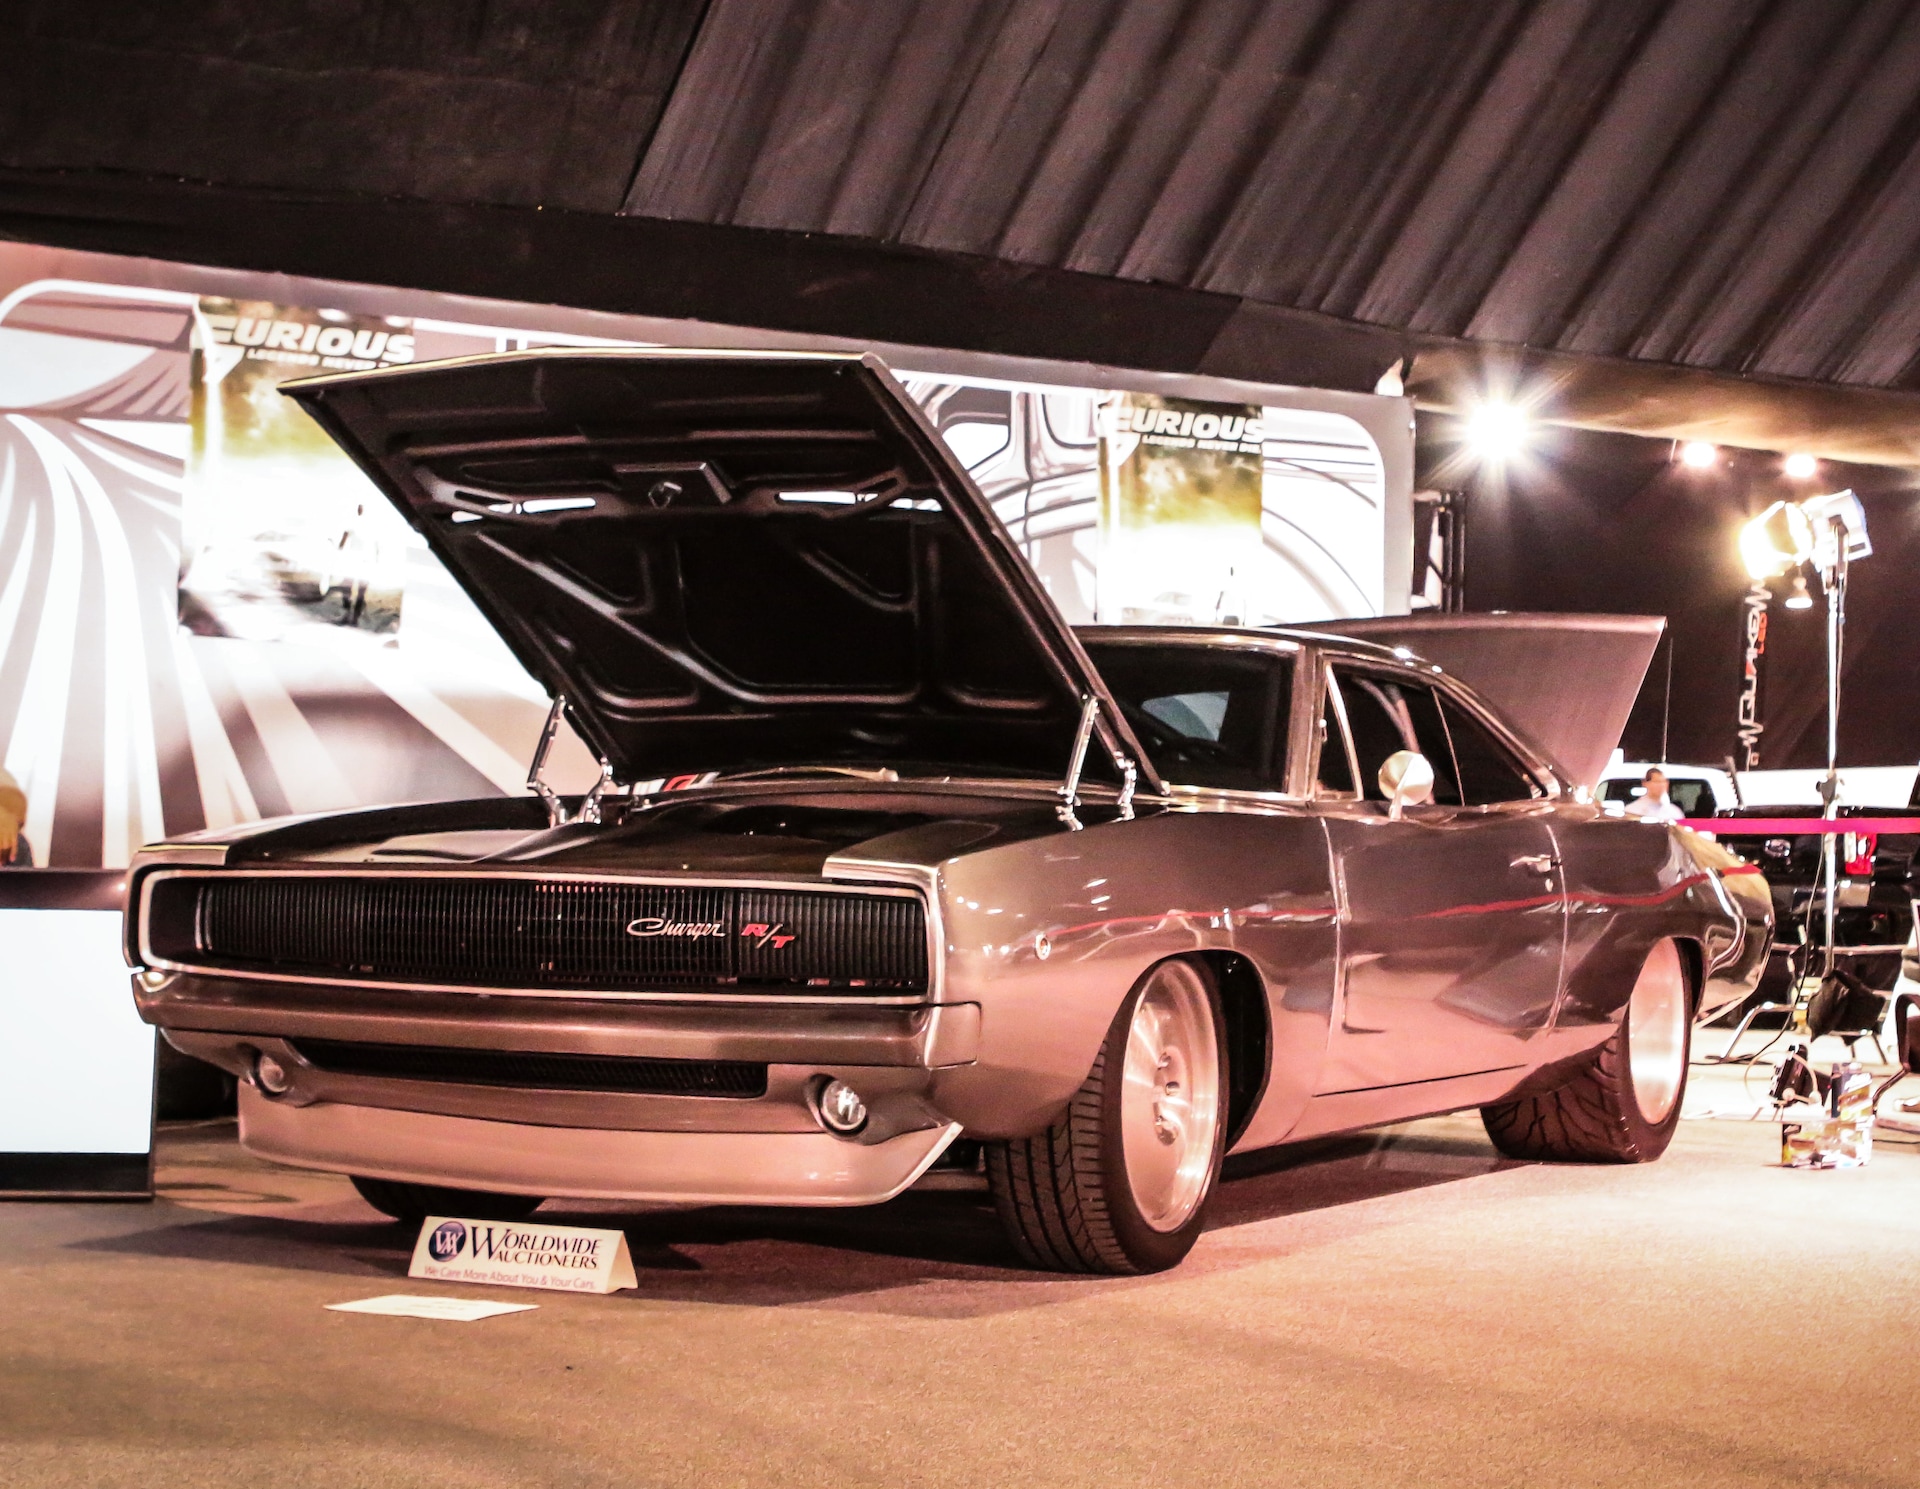 Project Maximus and Reverence Dodge Chargers at Riyadh Car Show